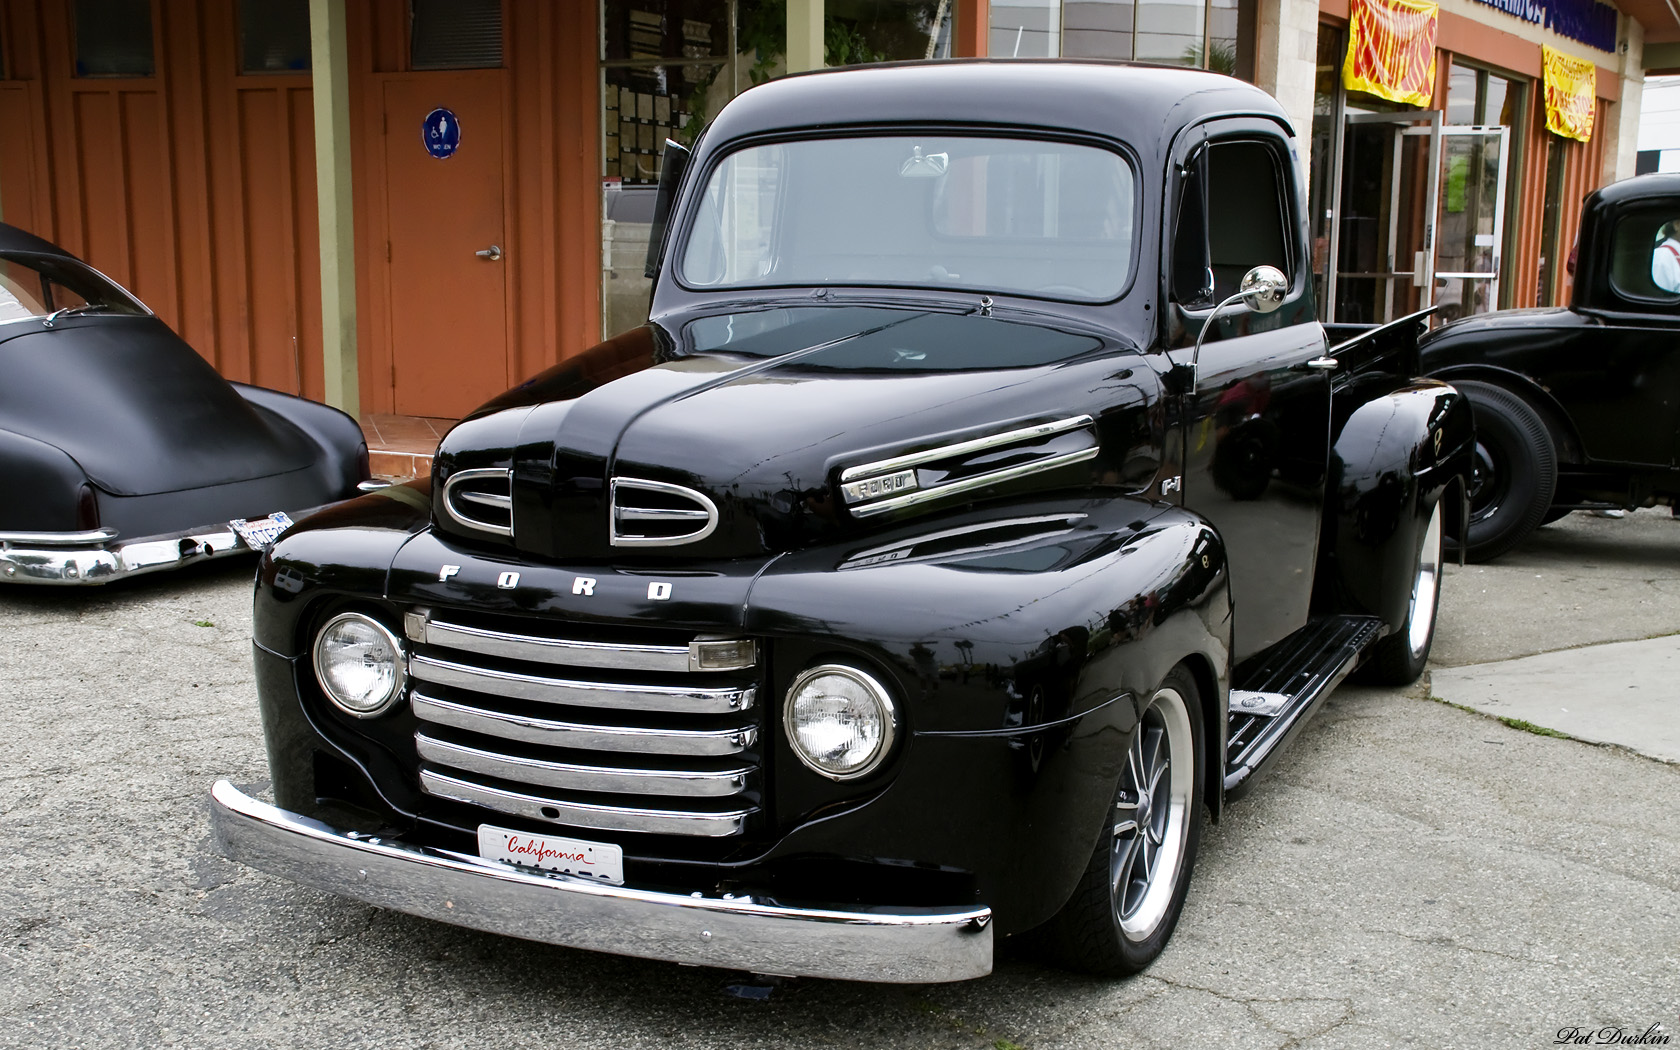 1951 Ford F-1 Backgrounds, Compatible - PC, Mobile, Gadgets| 1680x1050 px